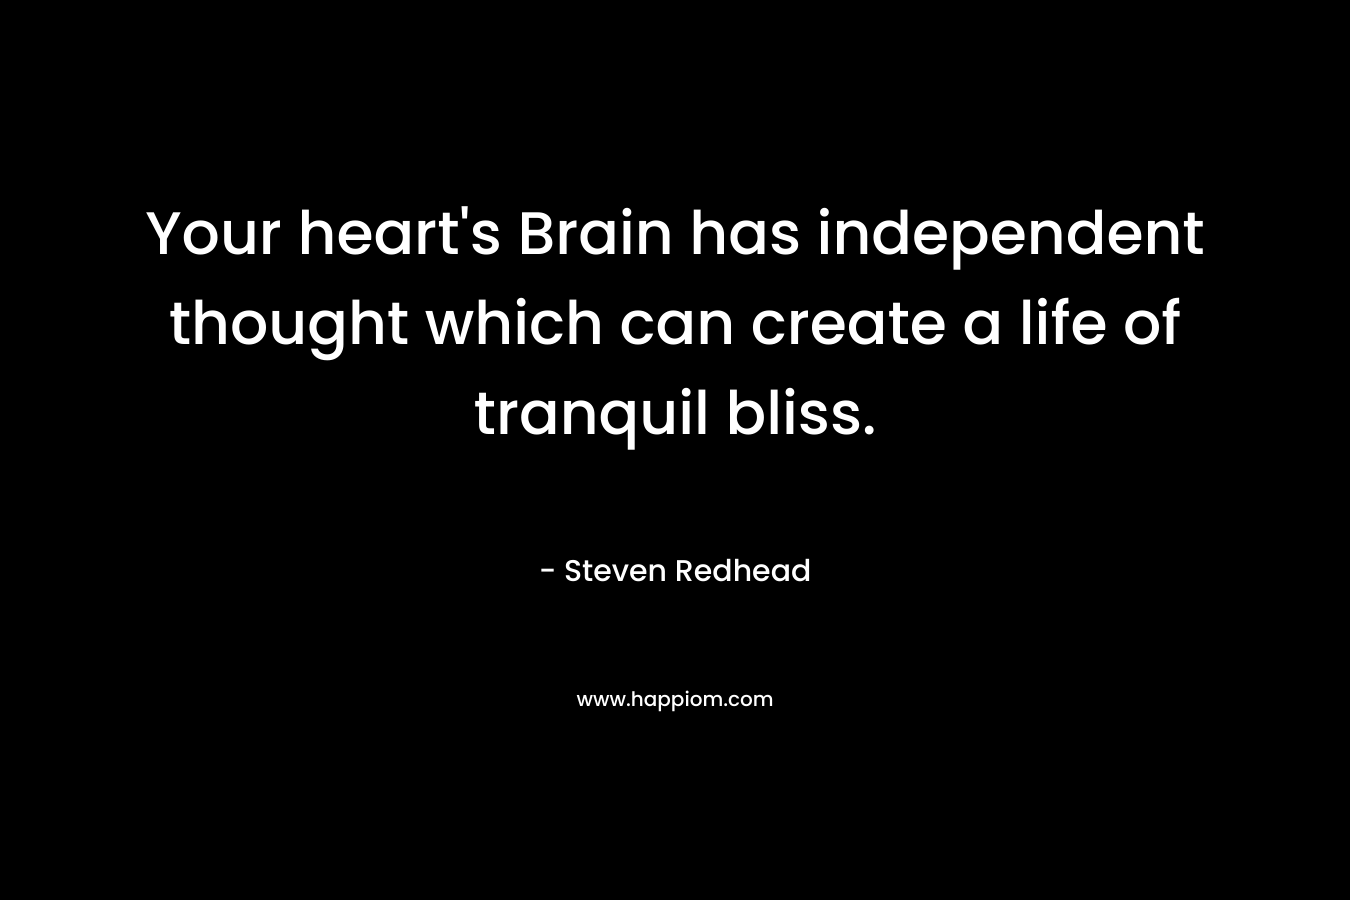 Your heart's Brain has independent thought which can create a life of tranquil bliss.